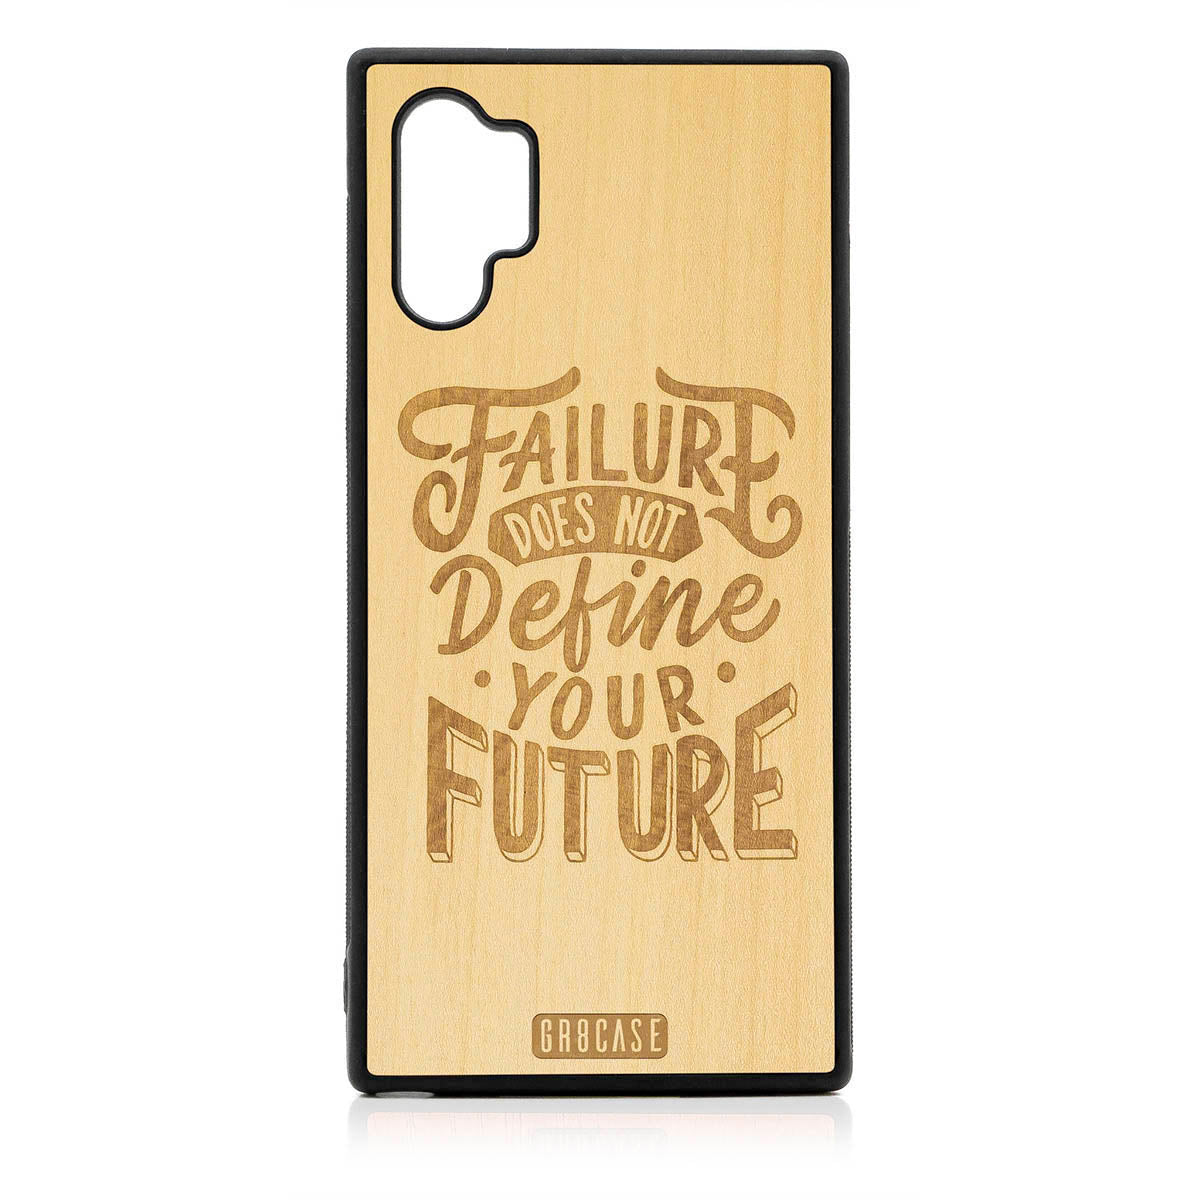 Failure Does Not Define You Future Design Wood Case For Samsung Galaxy Note 10 Plus by GR8CASE